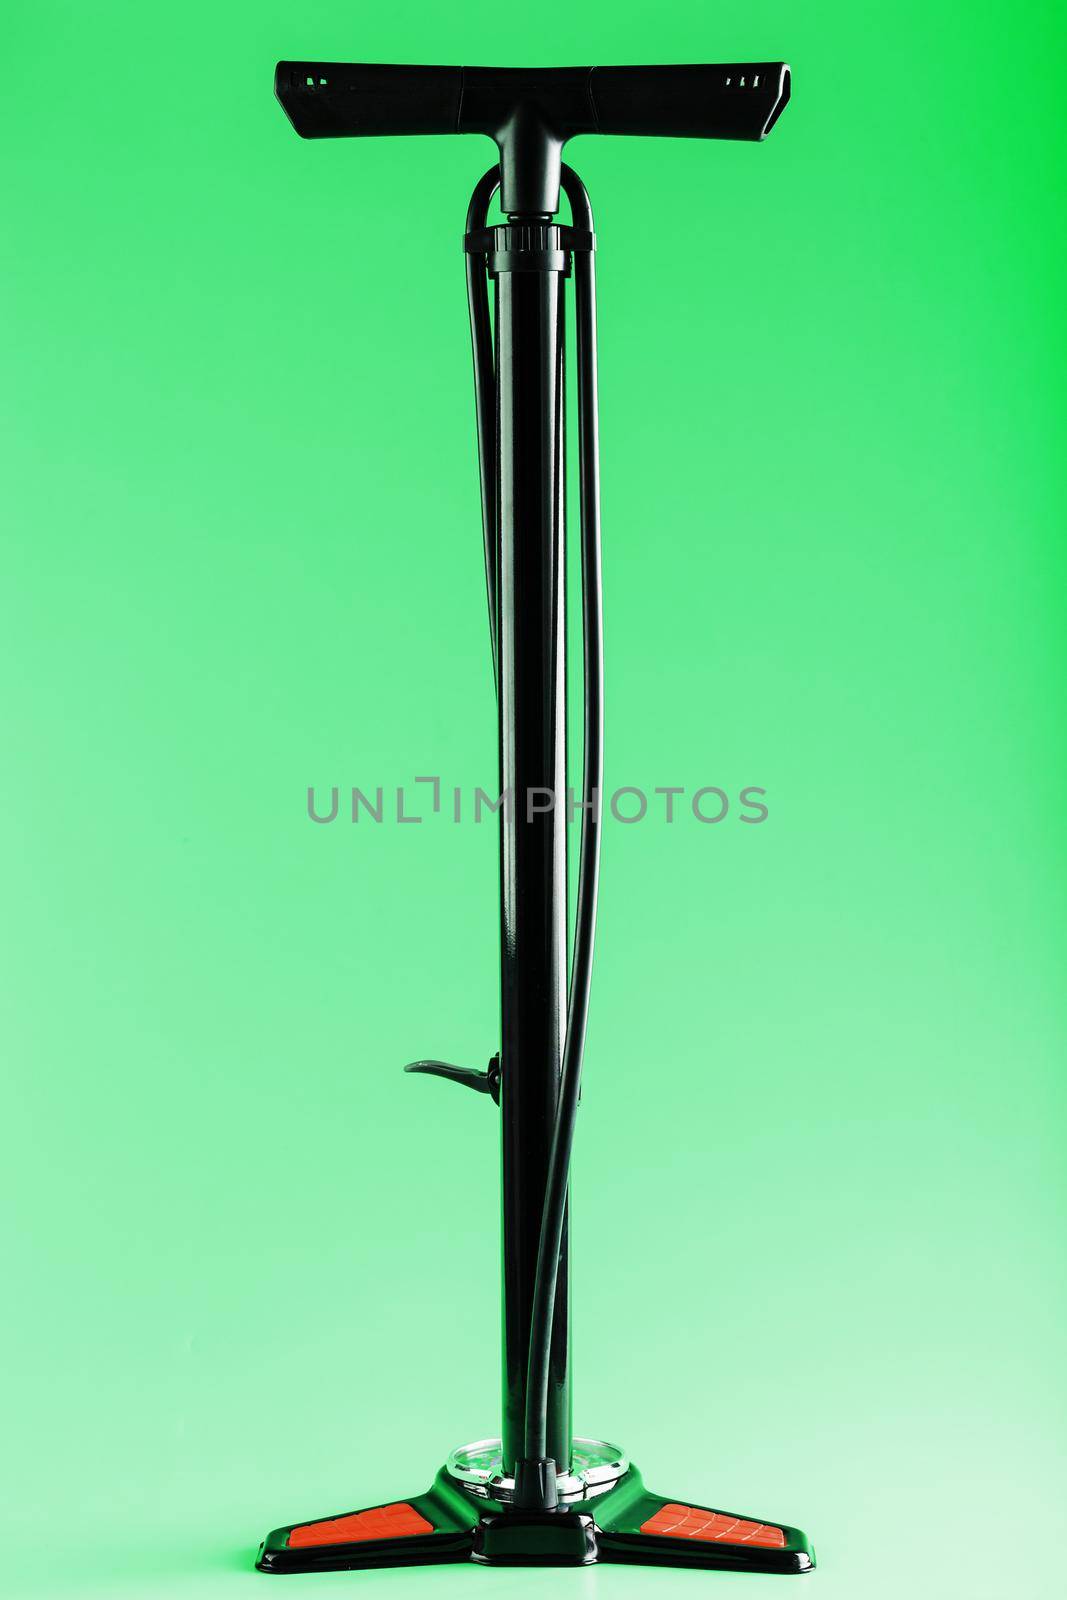 Black bicycle manual air pump for pumping wheels on a green background by AlexGrec